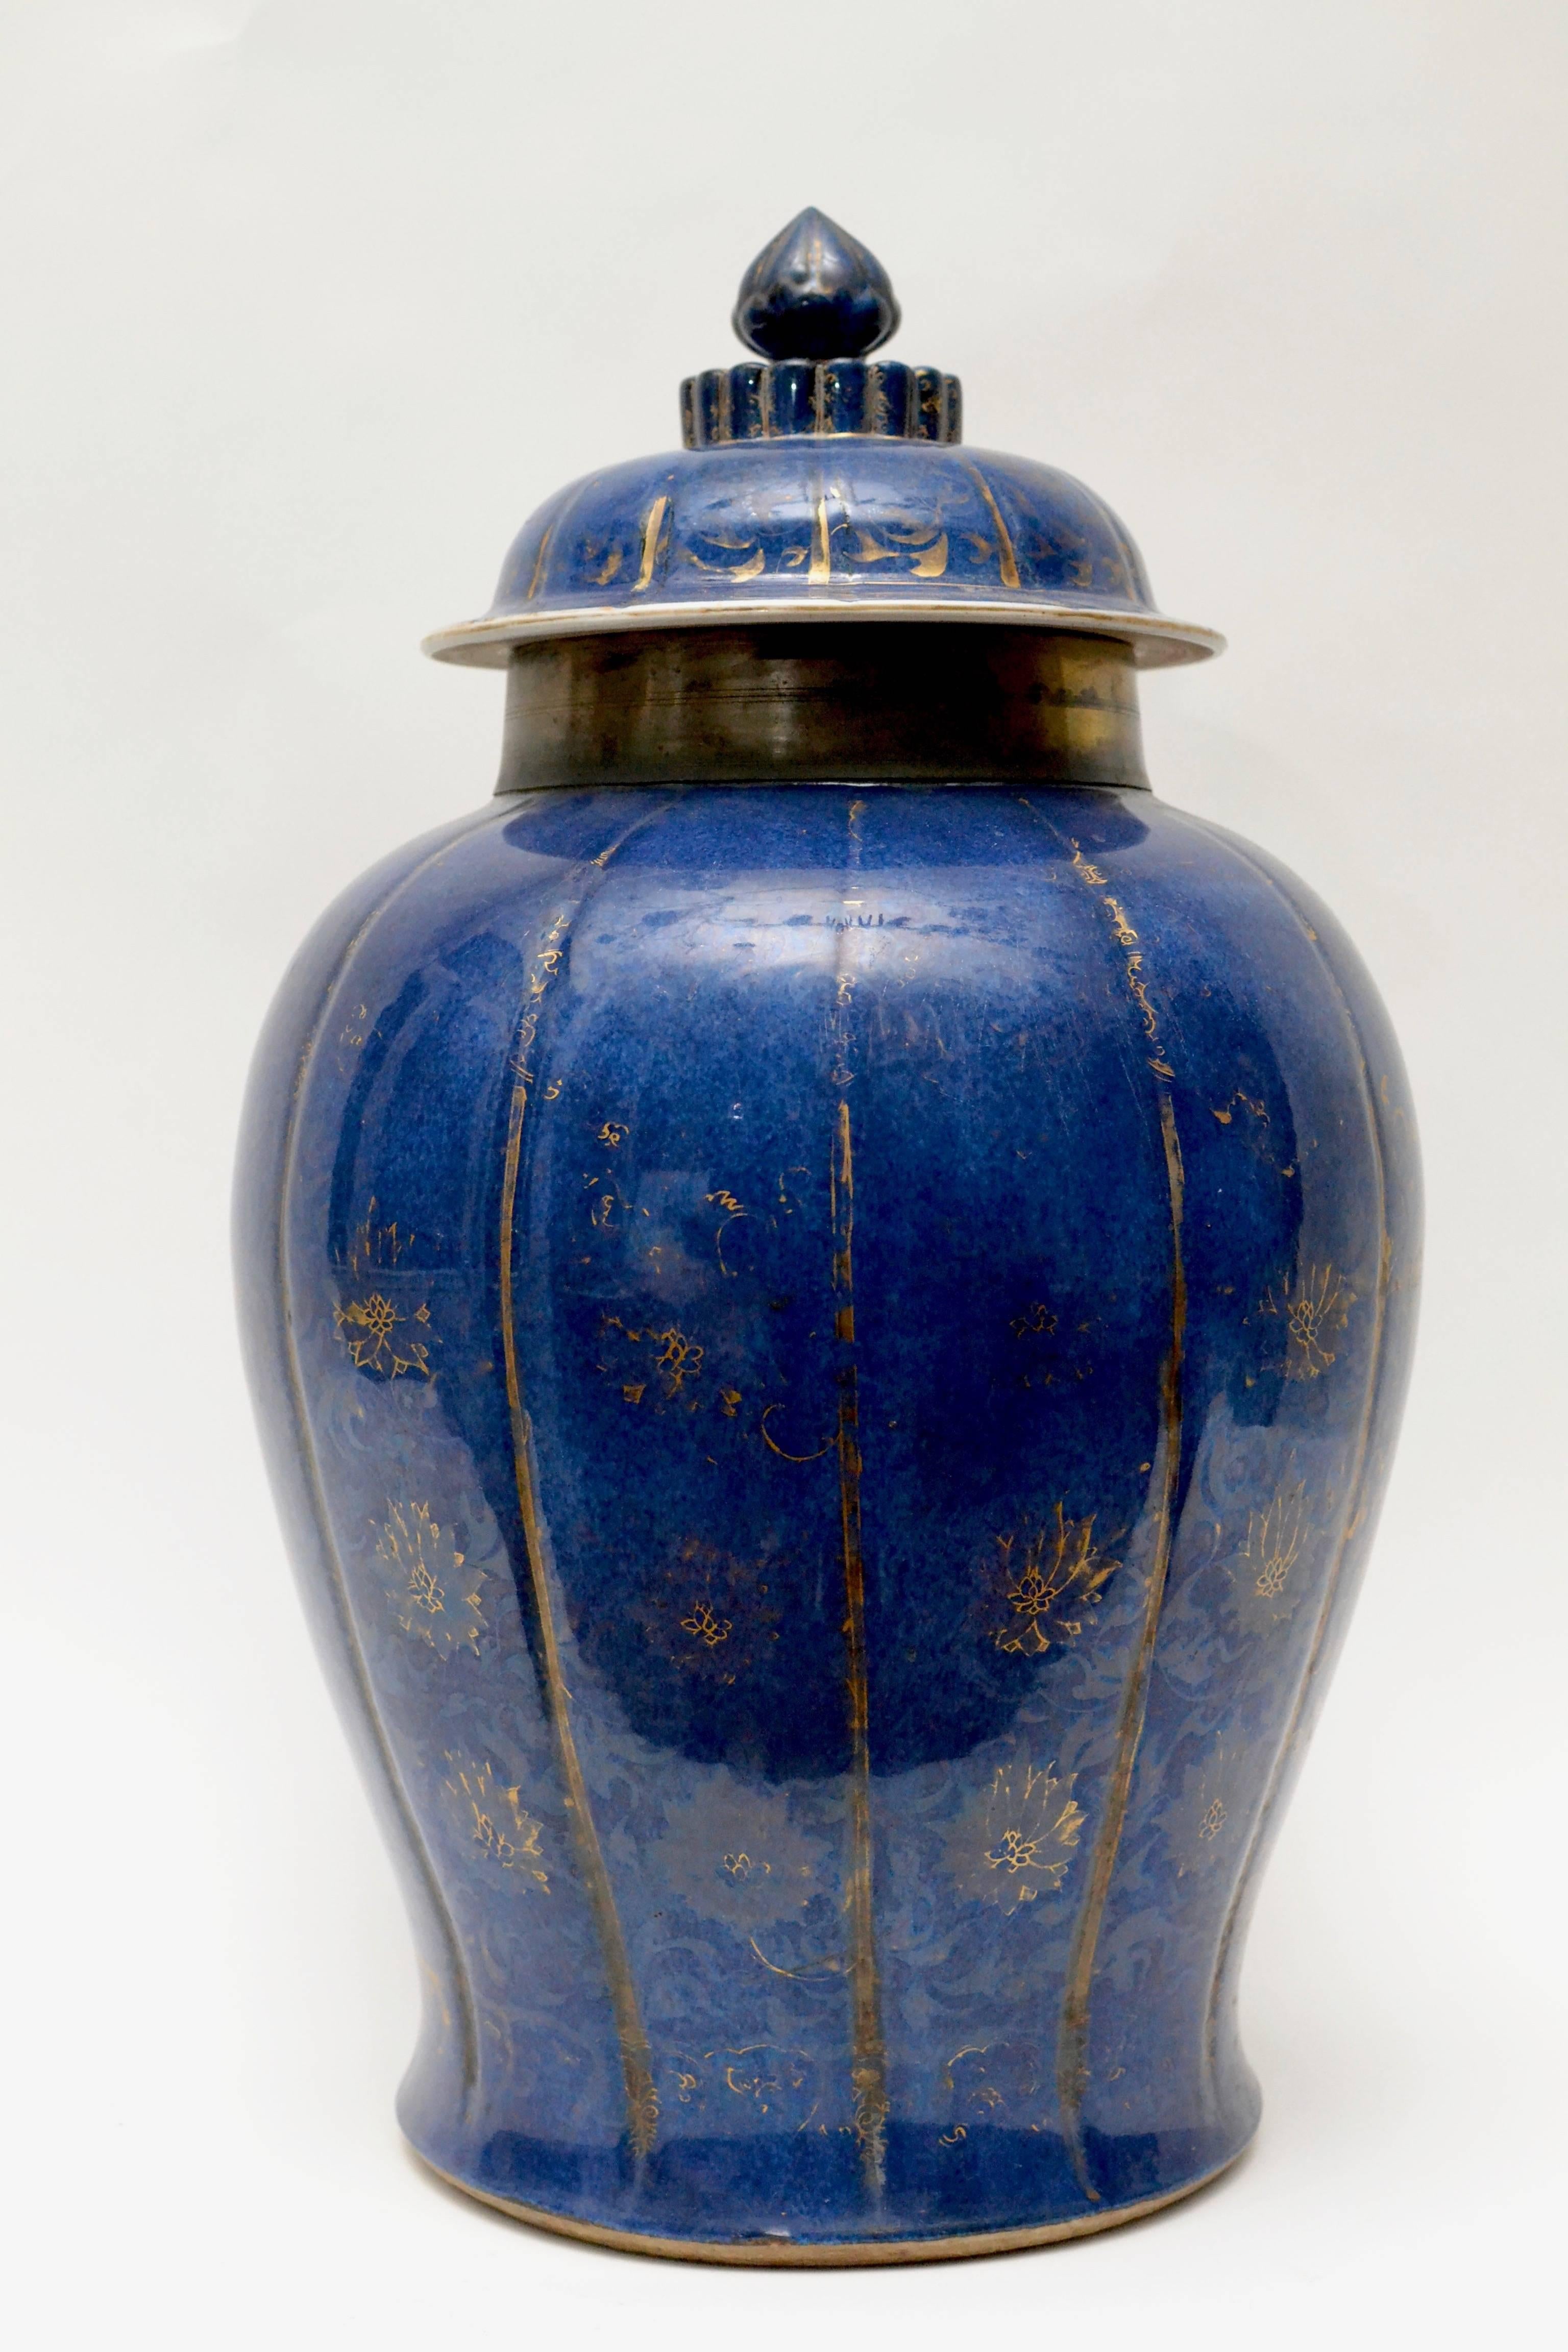 A Chinese powder blue and gilt urn with a lid from the Kangxi period (1661-1722). The neck of the urn mounted in brass.